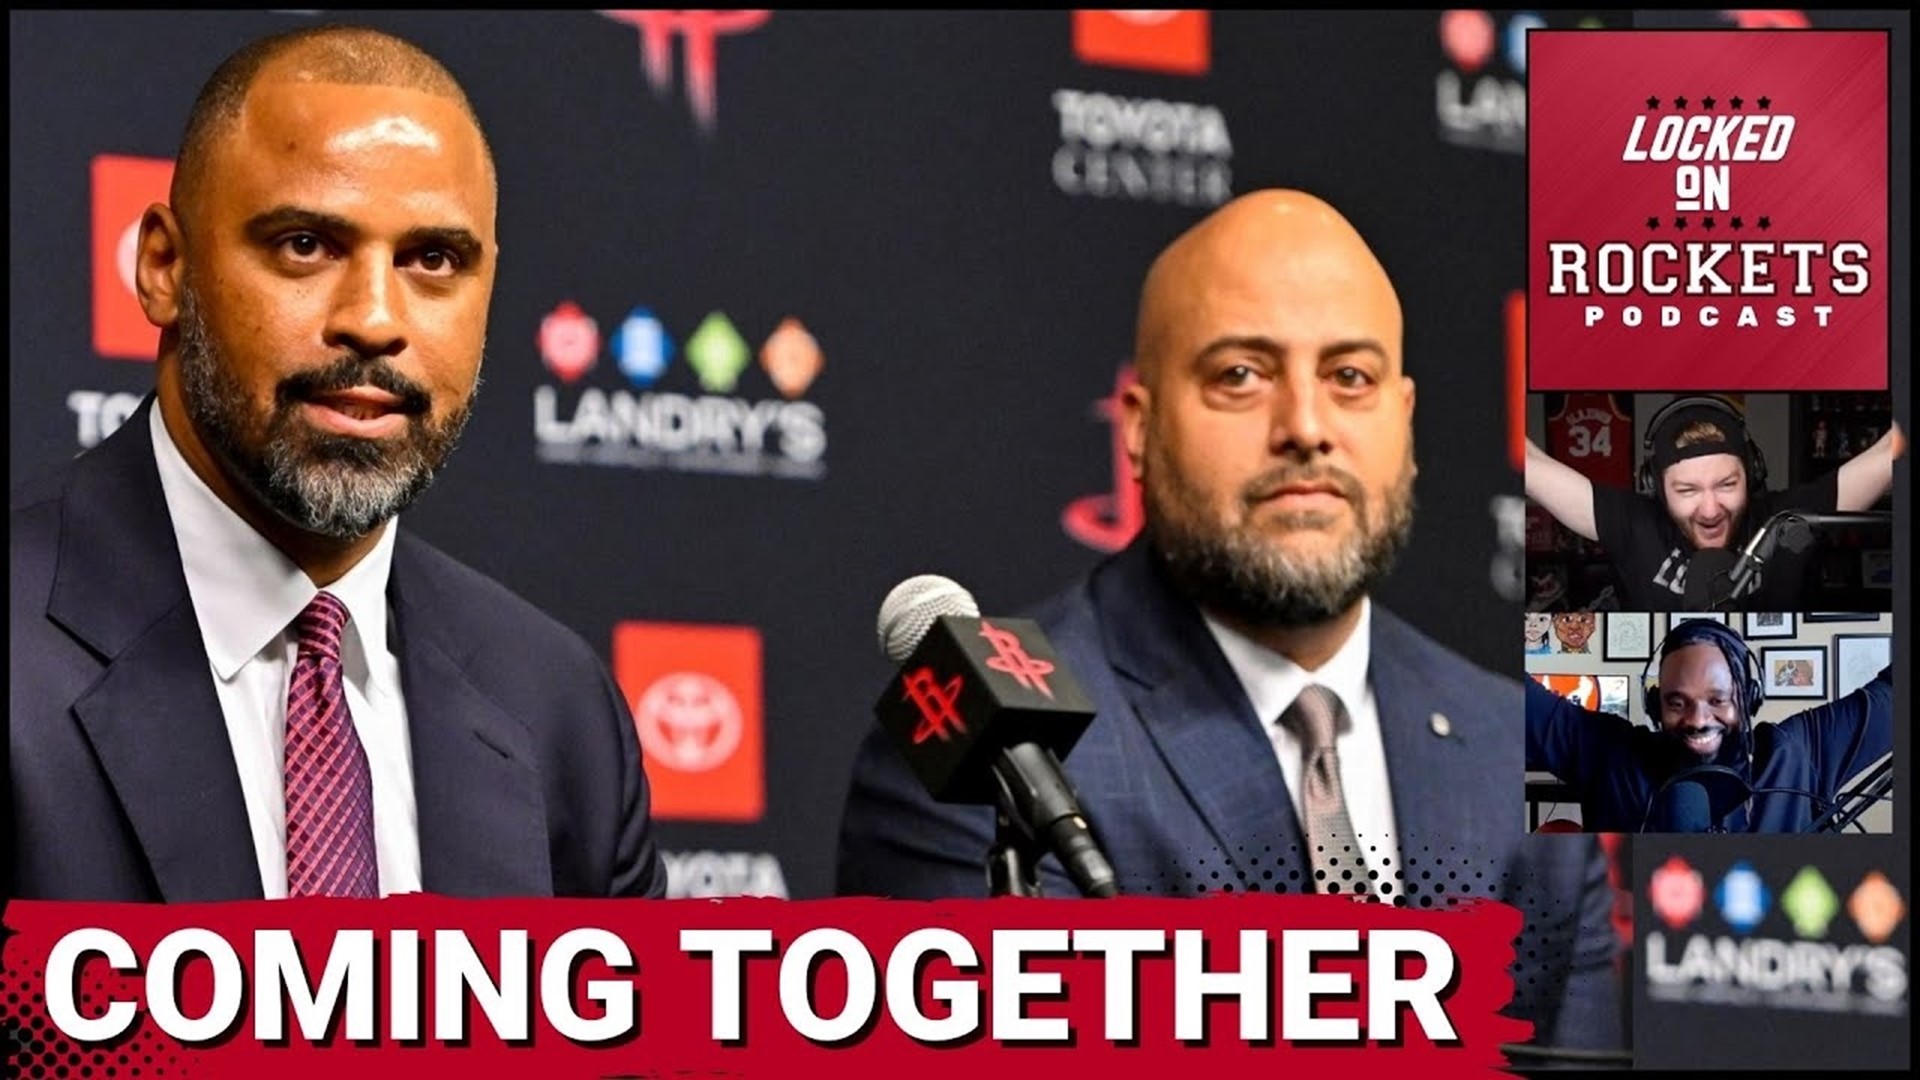 Host Jackson Gatlin is joined by weekly cohost Frank from Rockets Chop Shop to discuss how Ime Udoka's Houston Rockets coaching staff is coming along